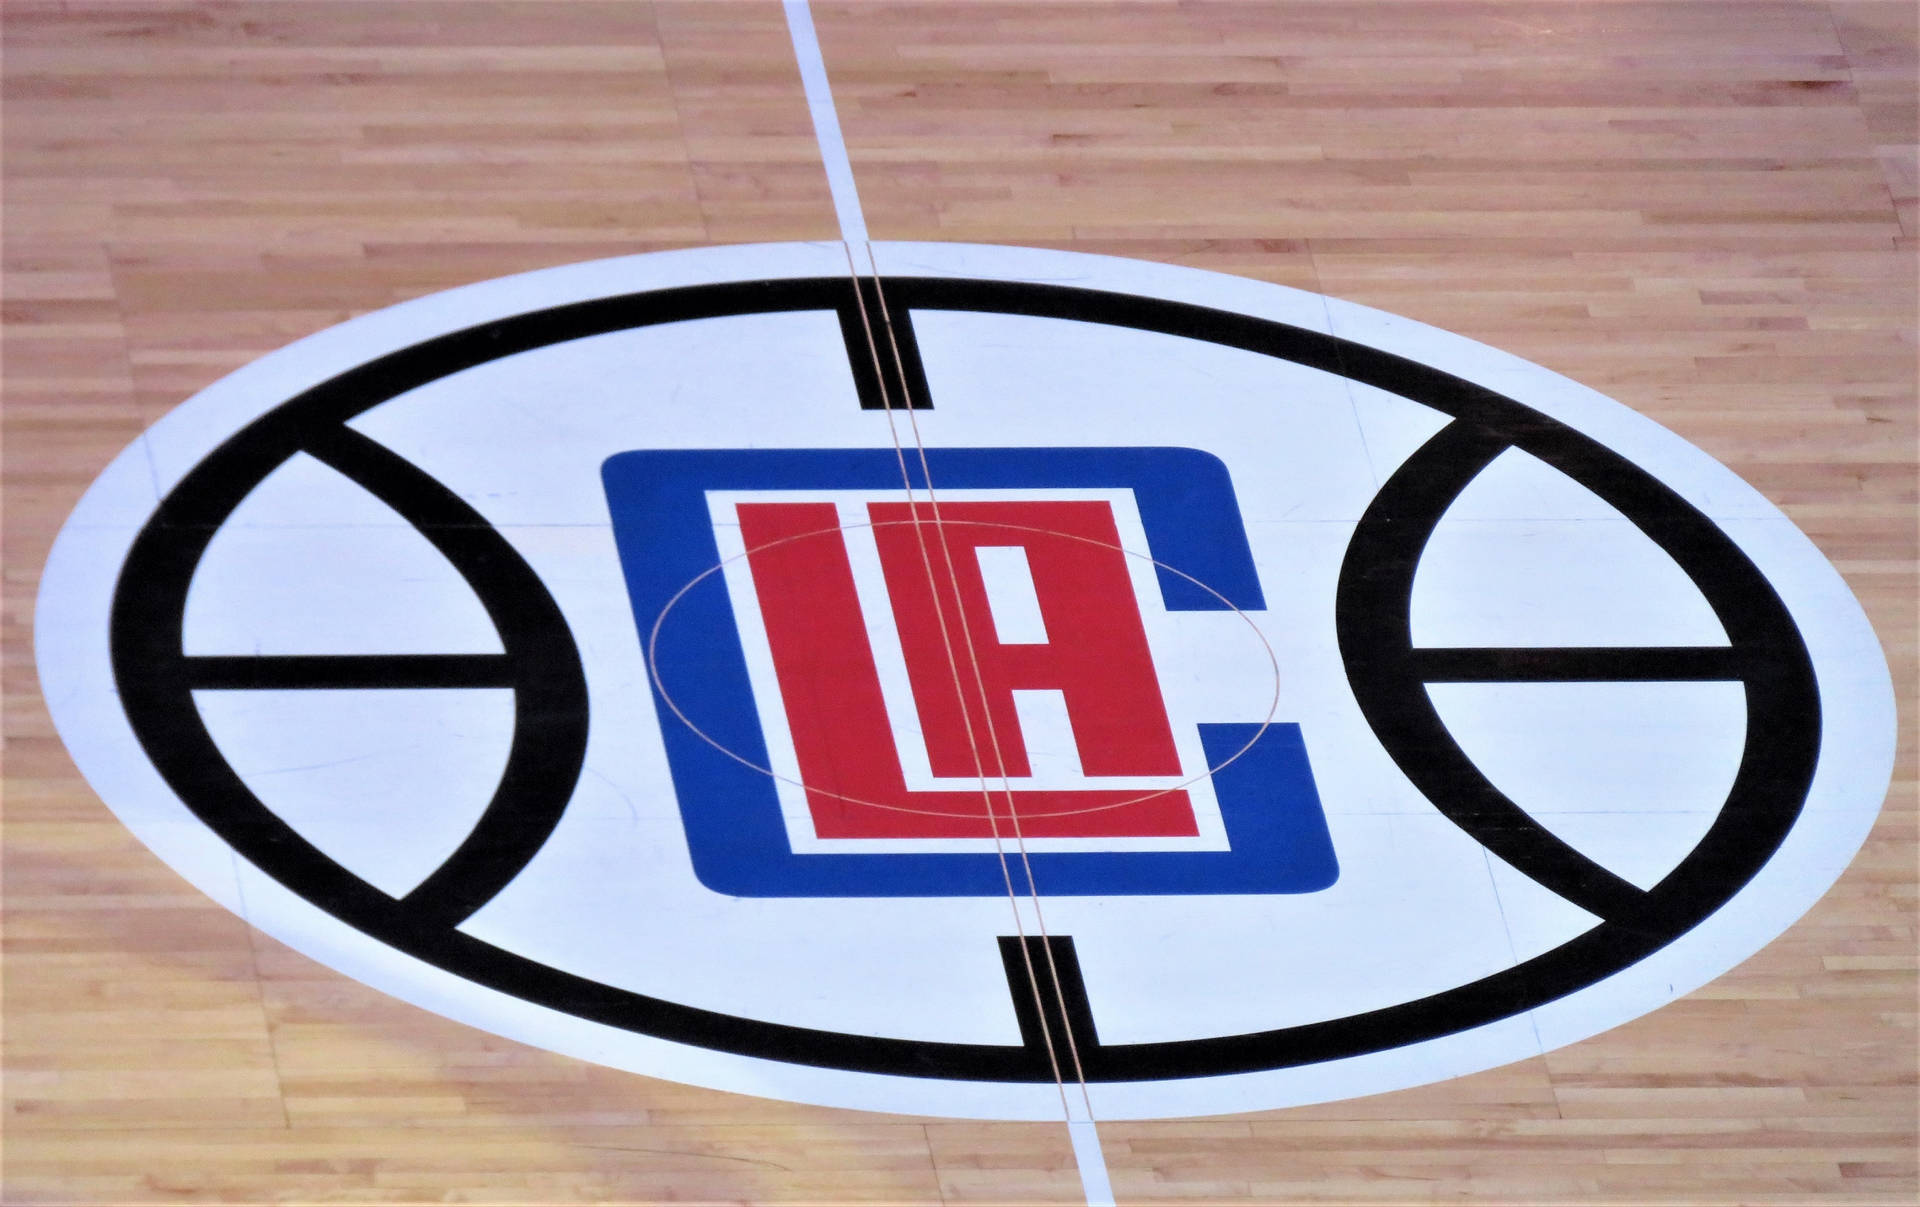 Losangeles Clippers Staples Court Would Be Translated To 